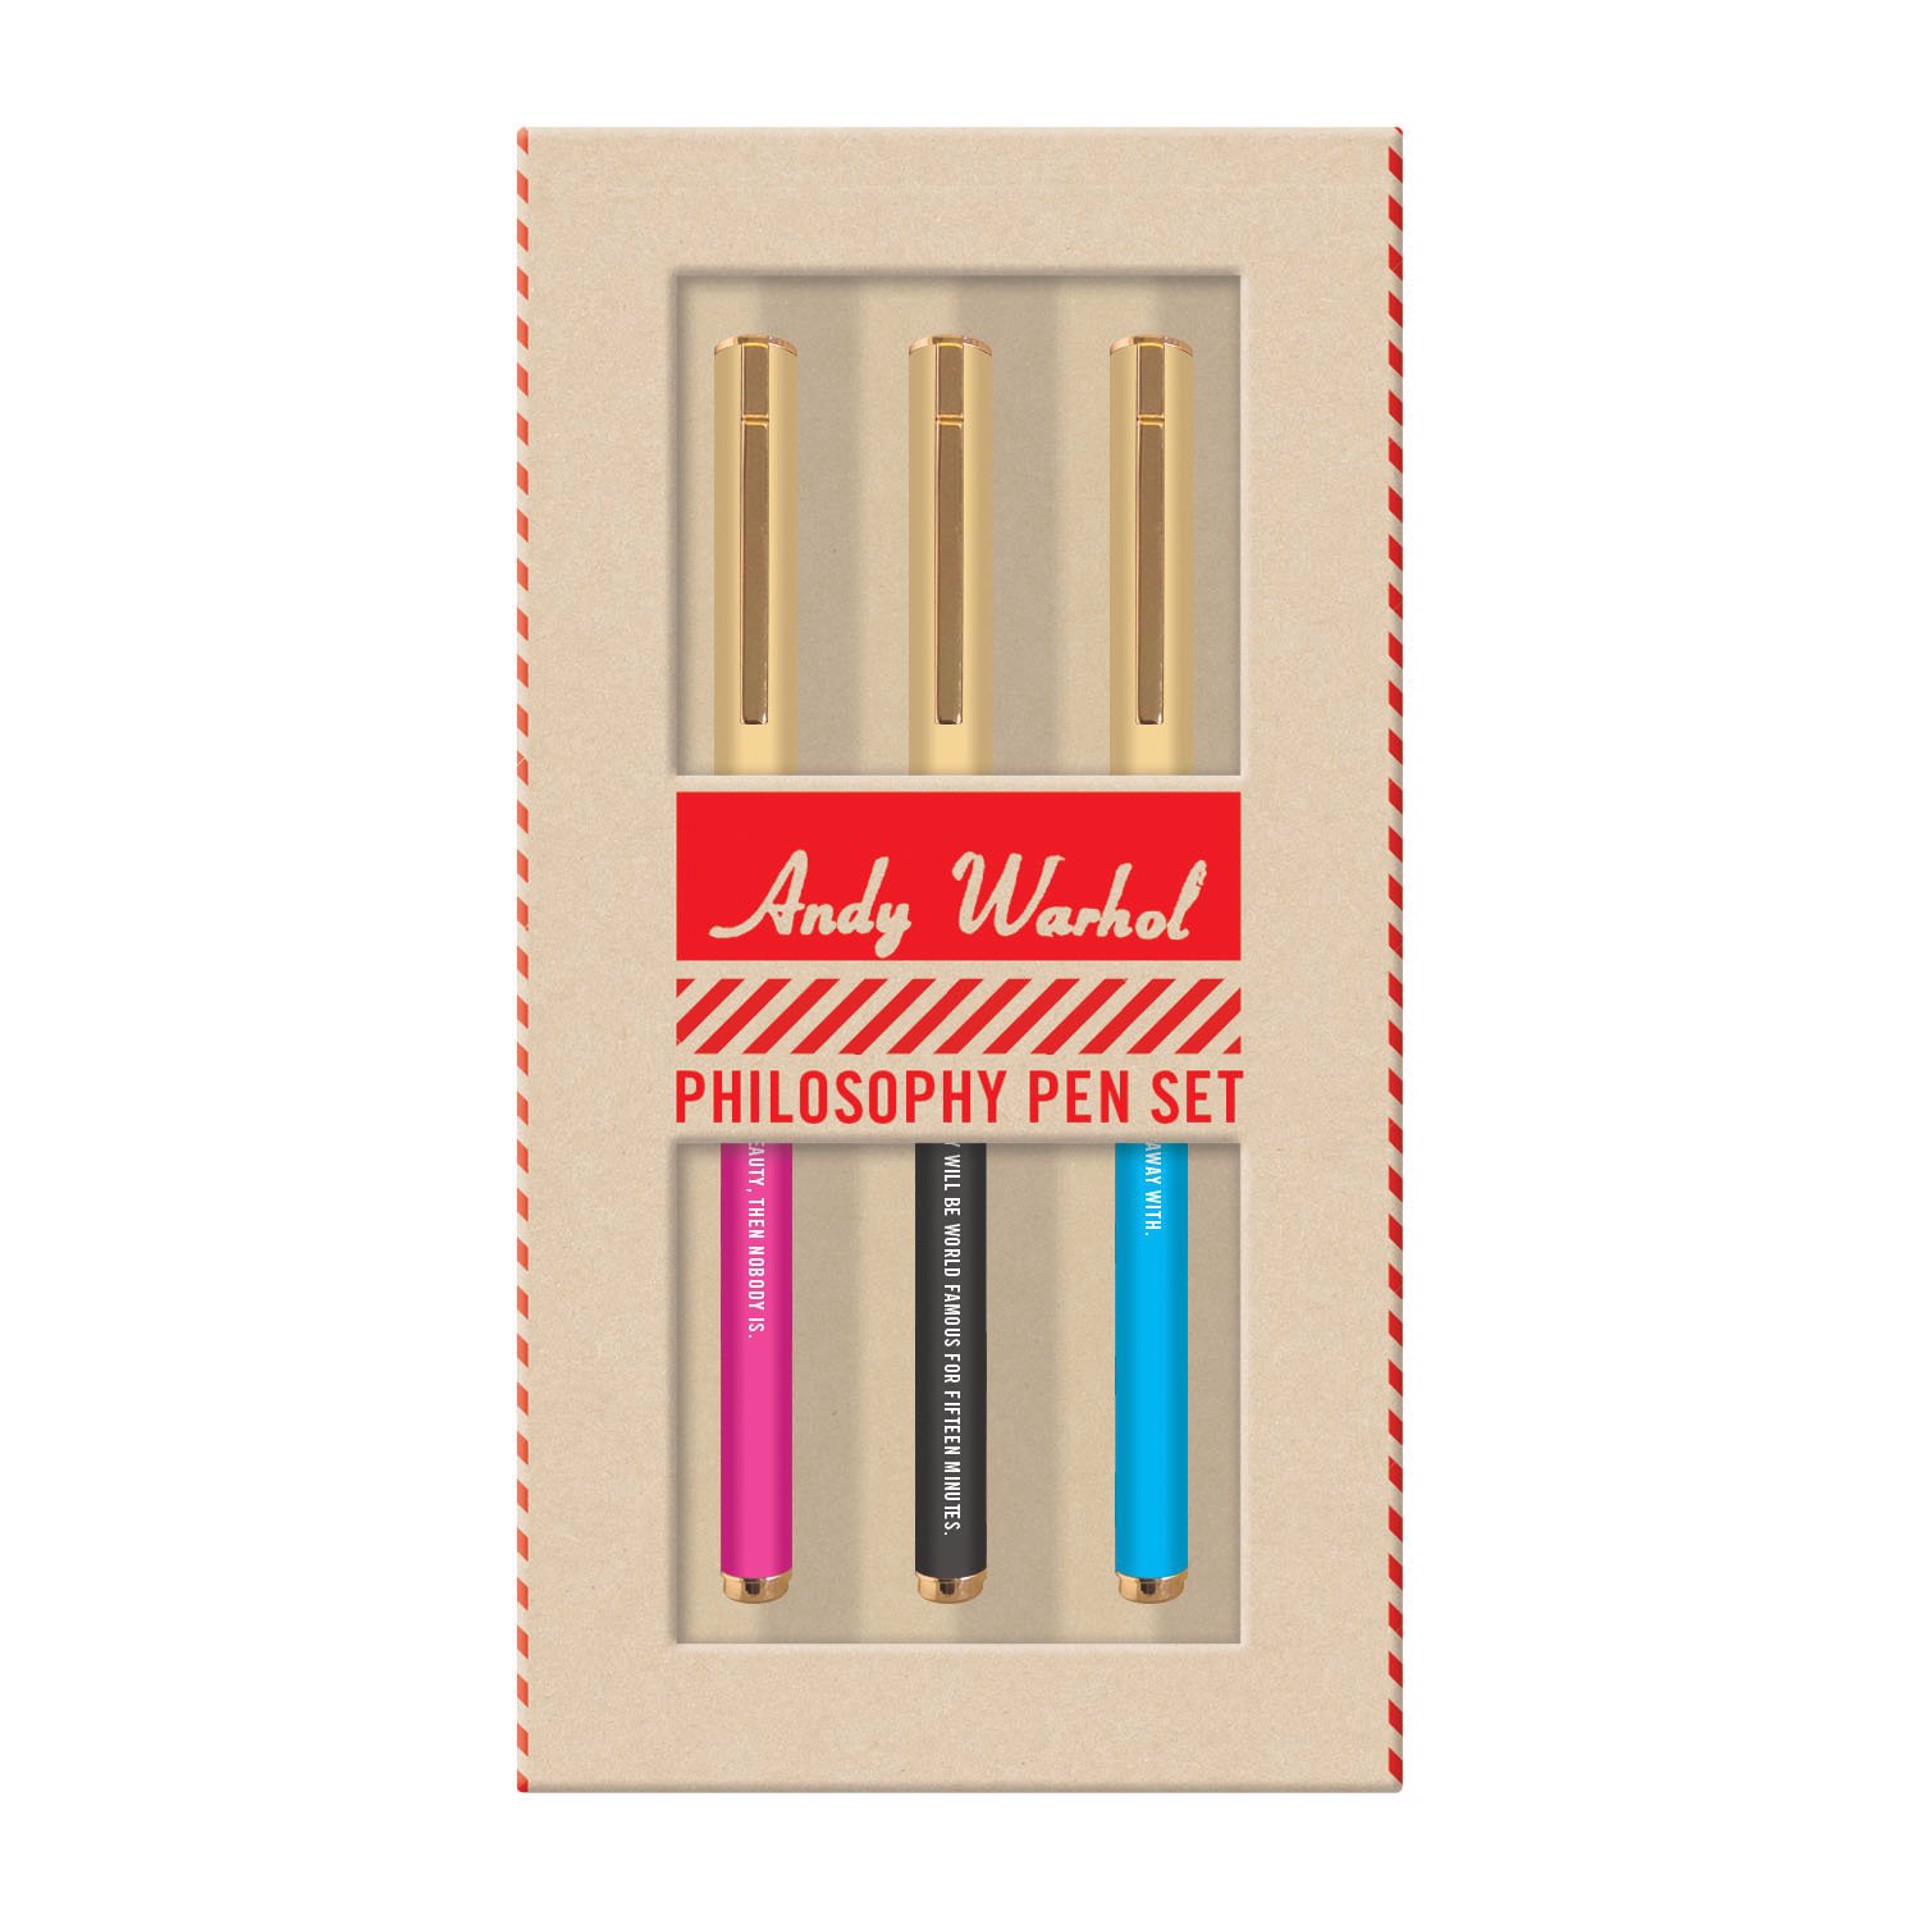 Andy Warhol Philosophy Pen Set by Andy Warhol